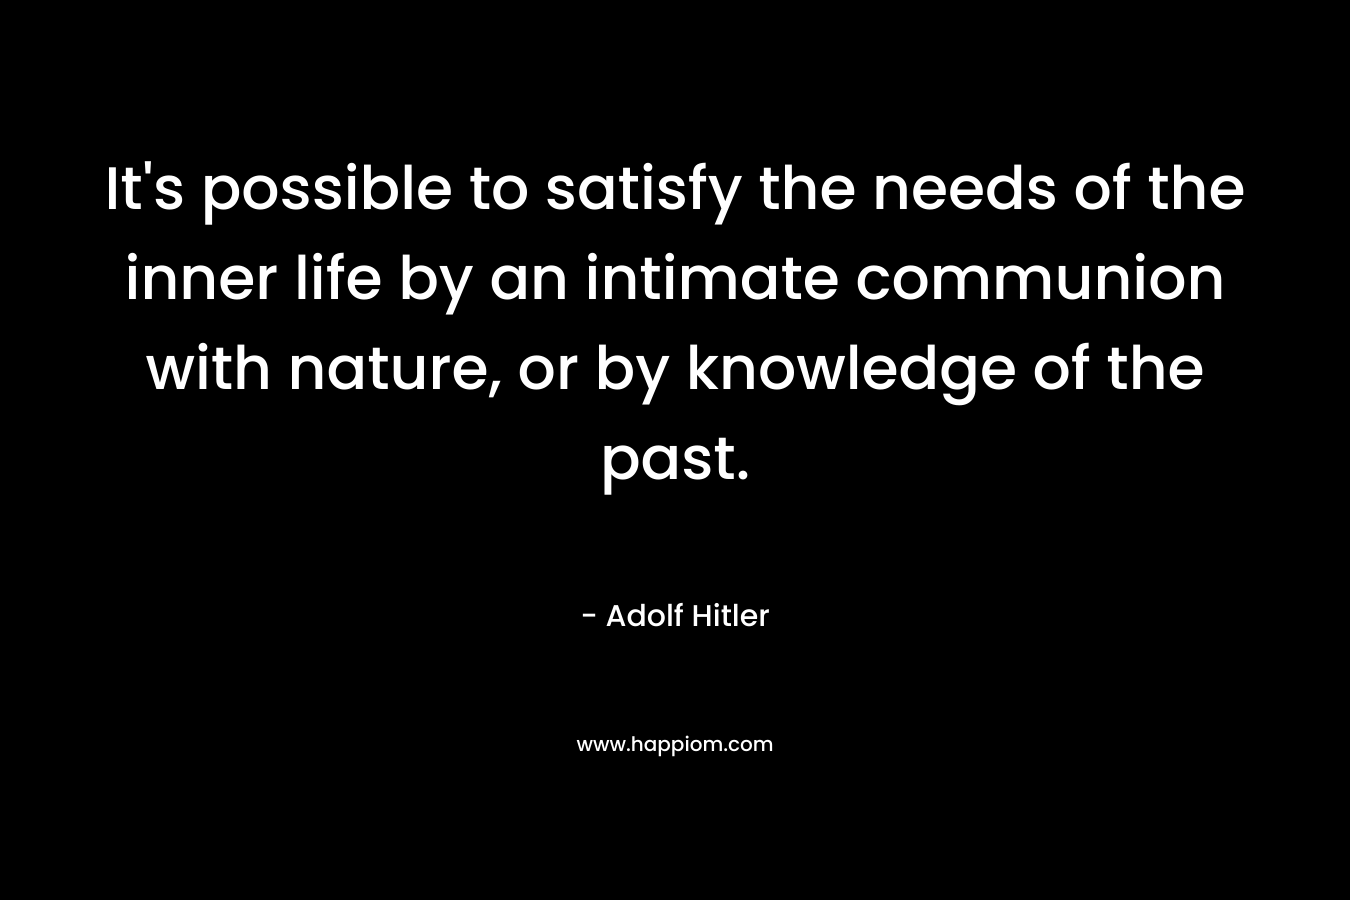 It’s possible to satisfy the needs of the inner life by an intimate communion with nature, or by knowledge of the past. – Adolf Hitler